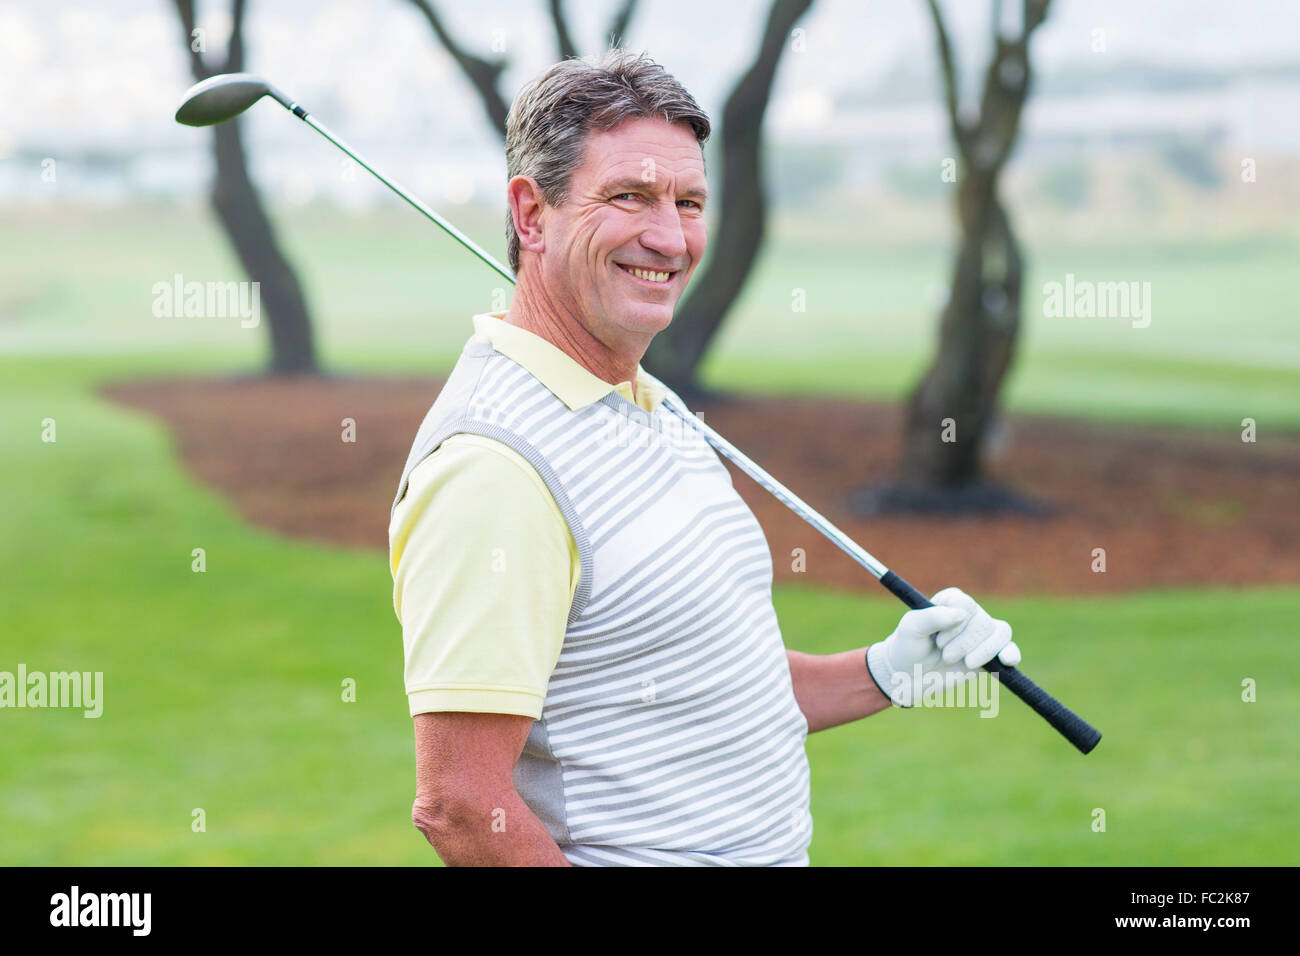 Golfer standing and swinging his club smiling at camera Stock Photo